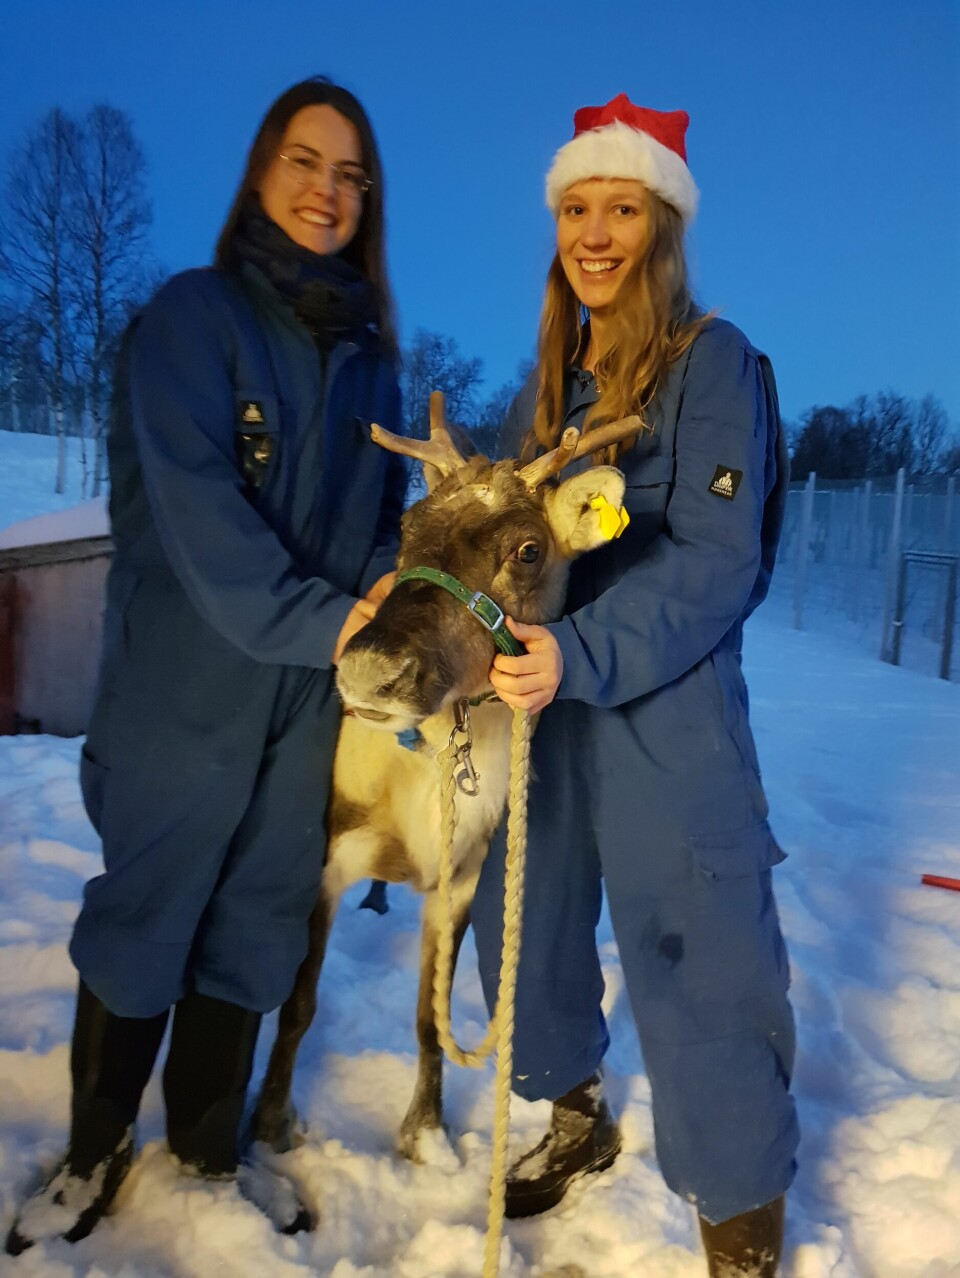 From left: Melanie Furrer and Sara Meier with one of the reindeer.